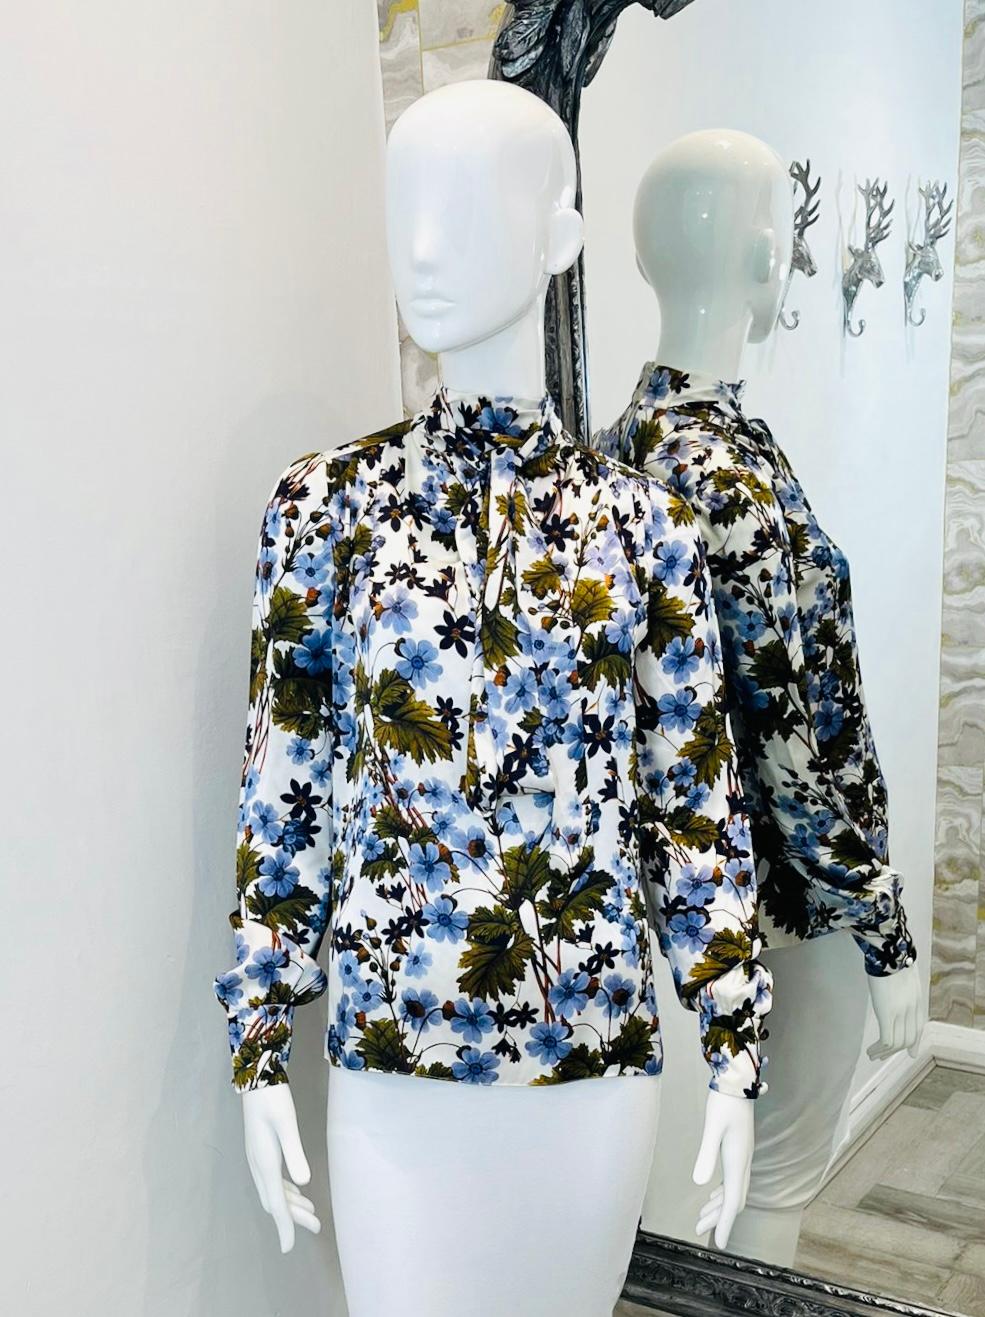 Erdem Floral Tie Neck Top

Long sleeved blouse designed with muted light blue and dark green floral prints throughout.

Detailed with high, tied neckline and buttoned cuffs.

Size – S (Label missing but corresponds)

Condition – Very